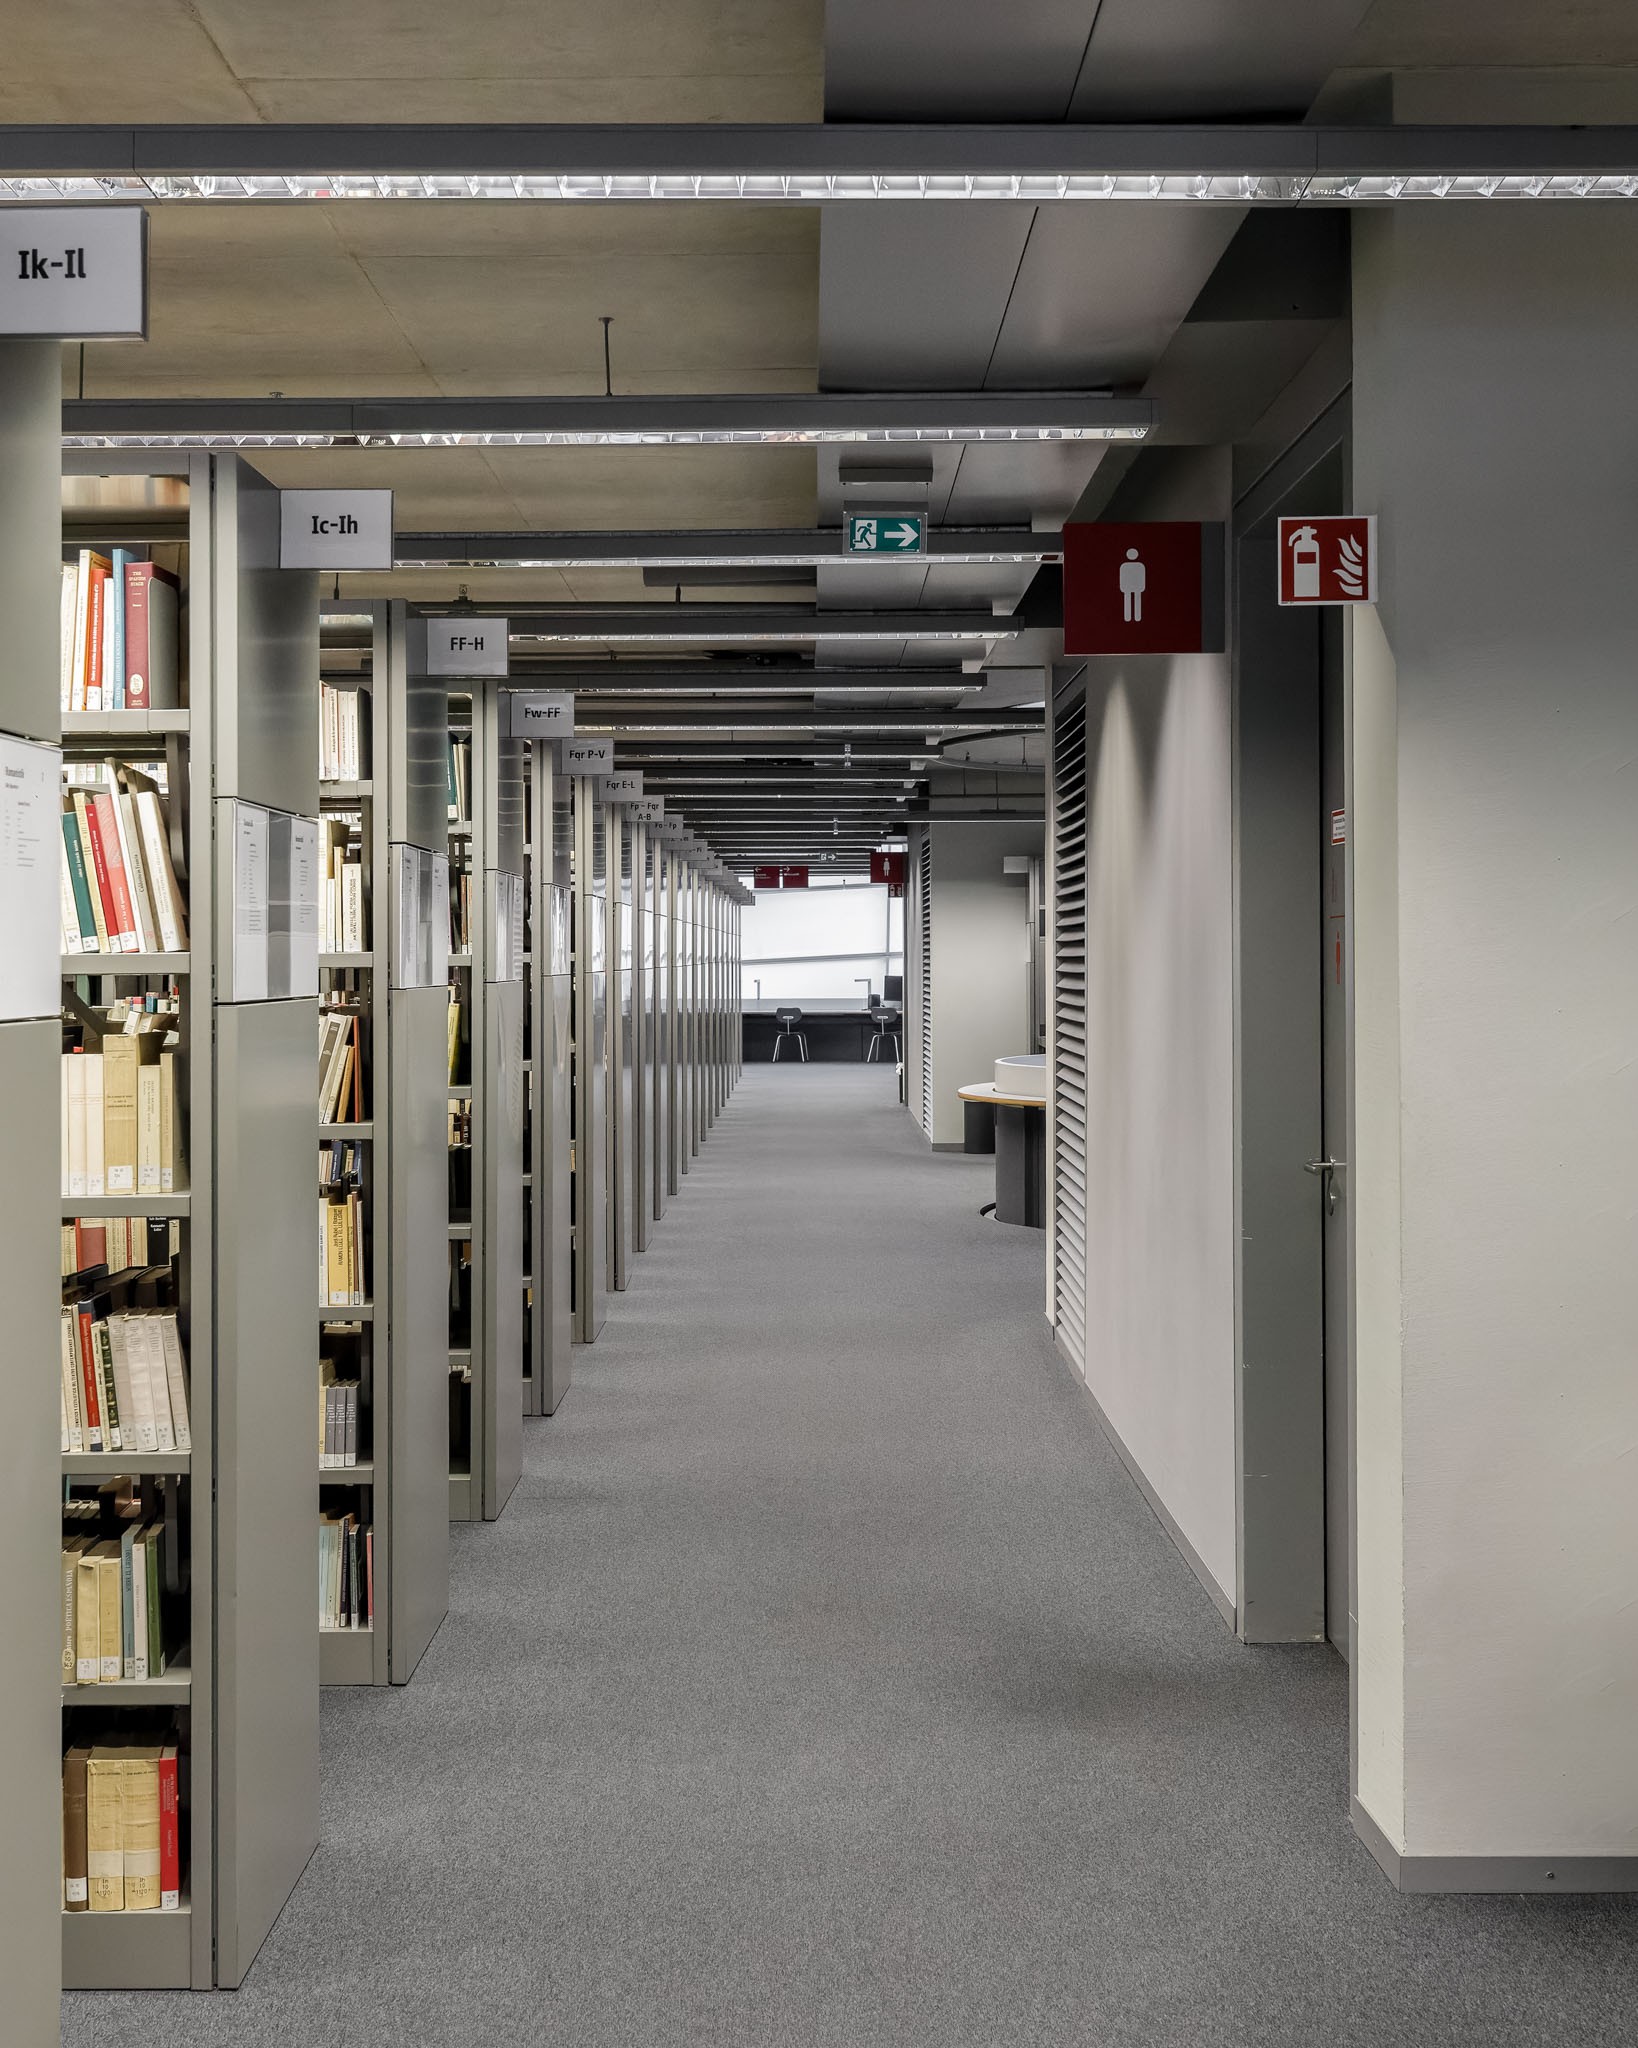 Philological Library of Berlin